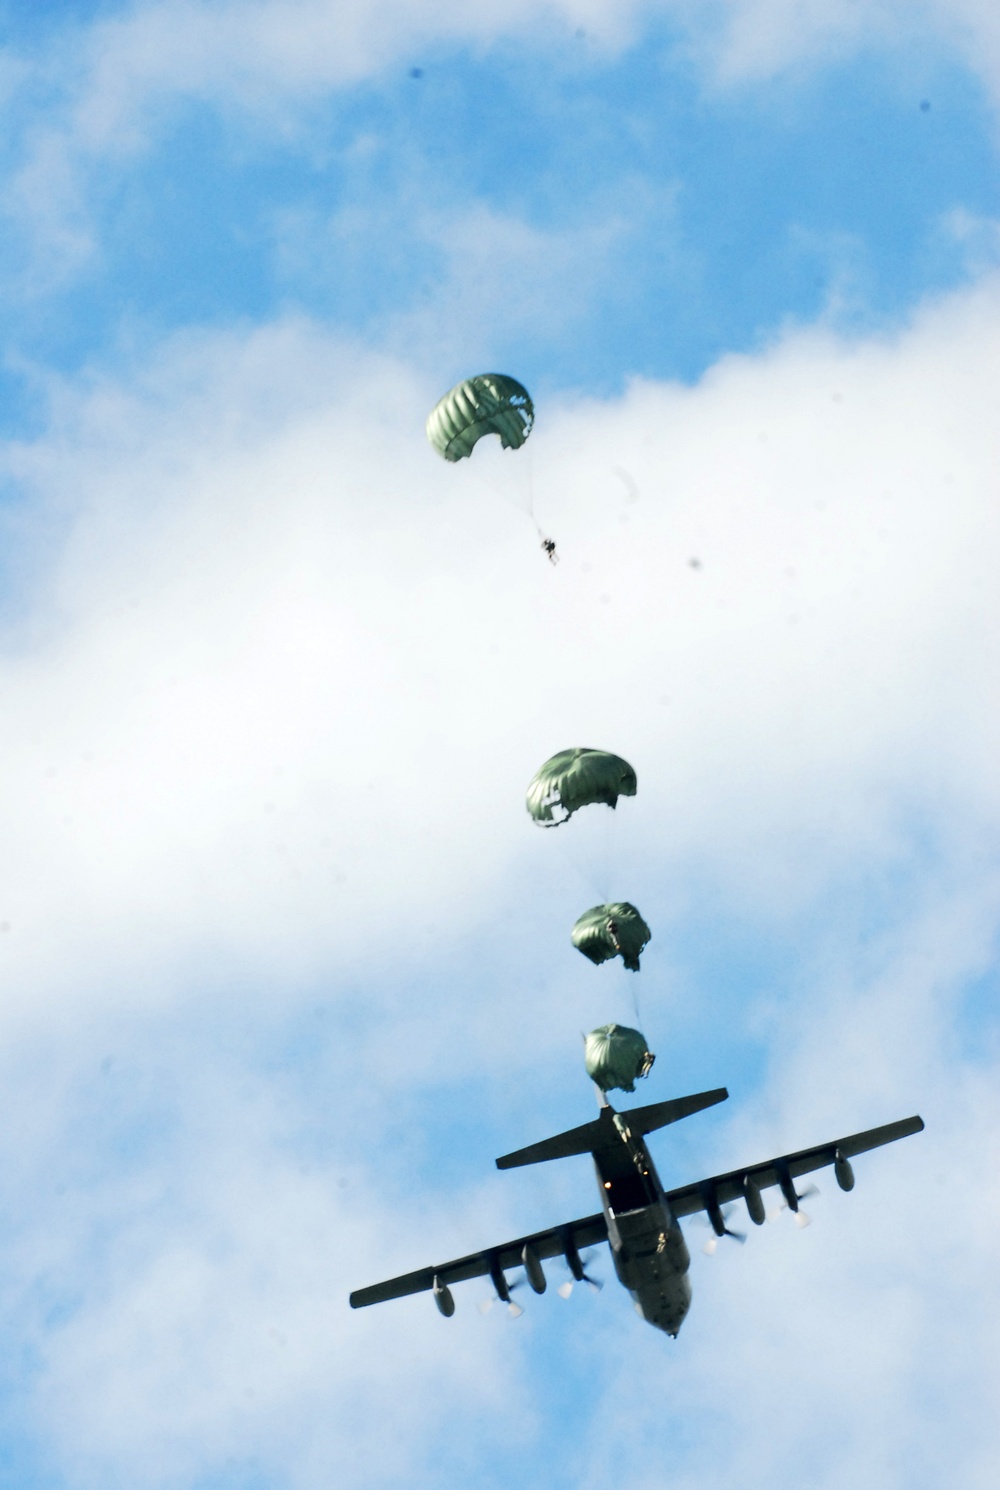 352nd Special Operations Group, Air Drop, Mc-130p Combat Shadow, 21st Tactical Airbase